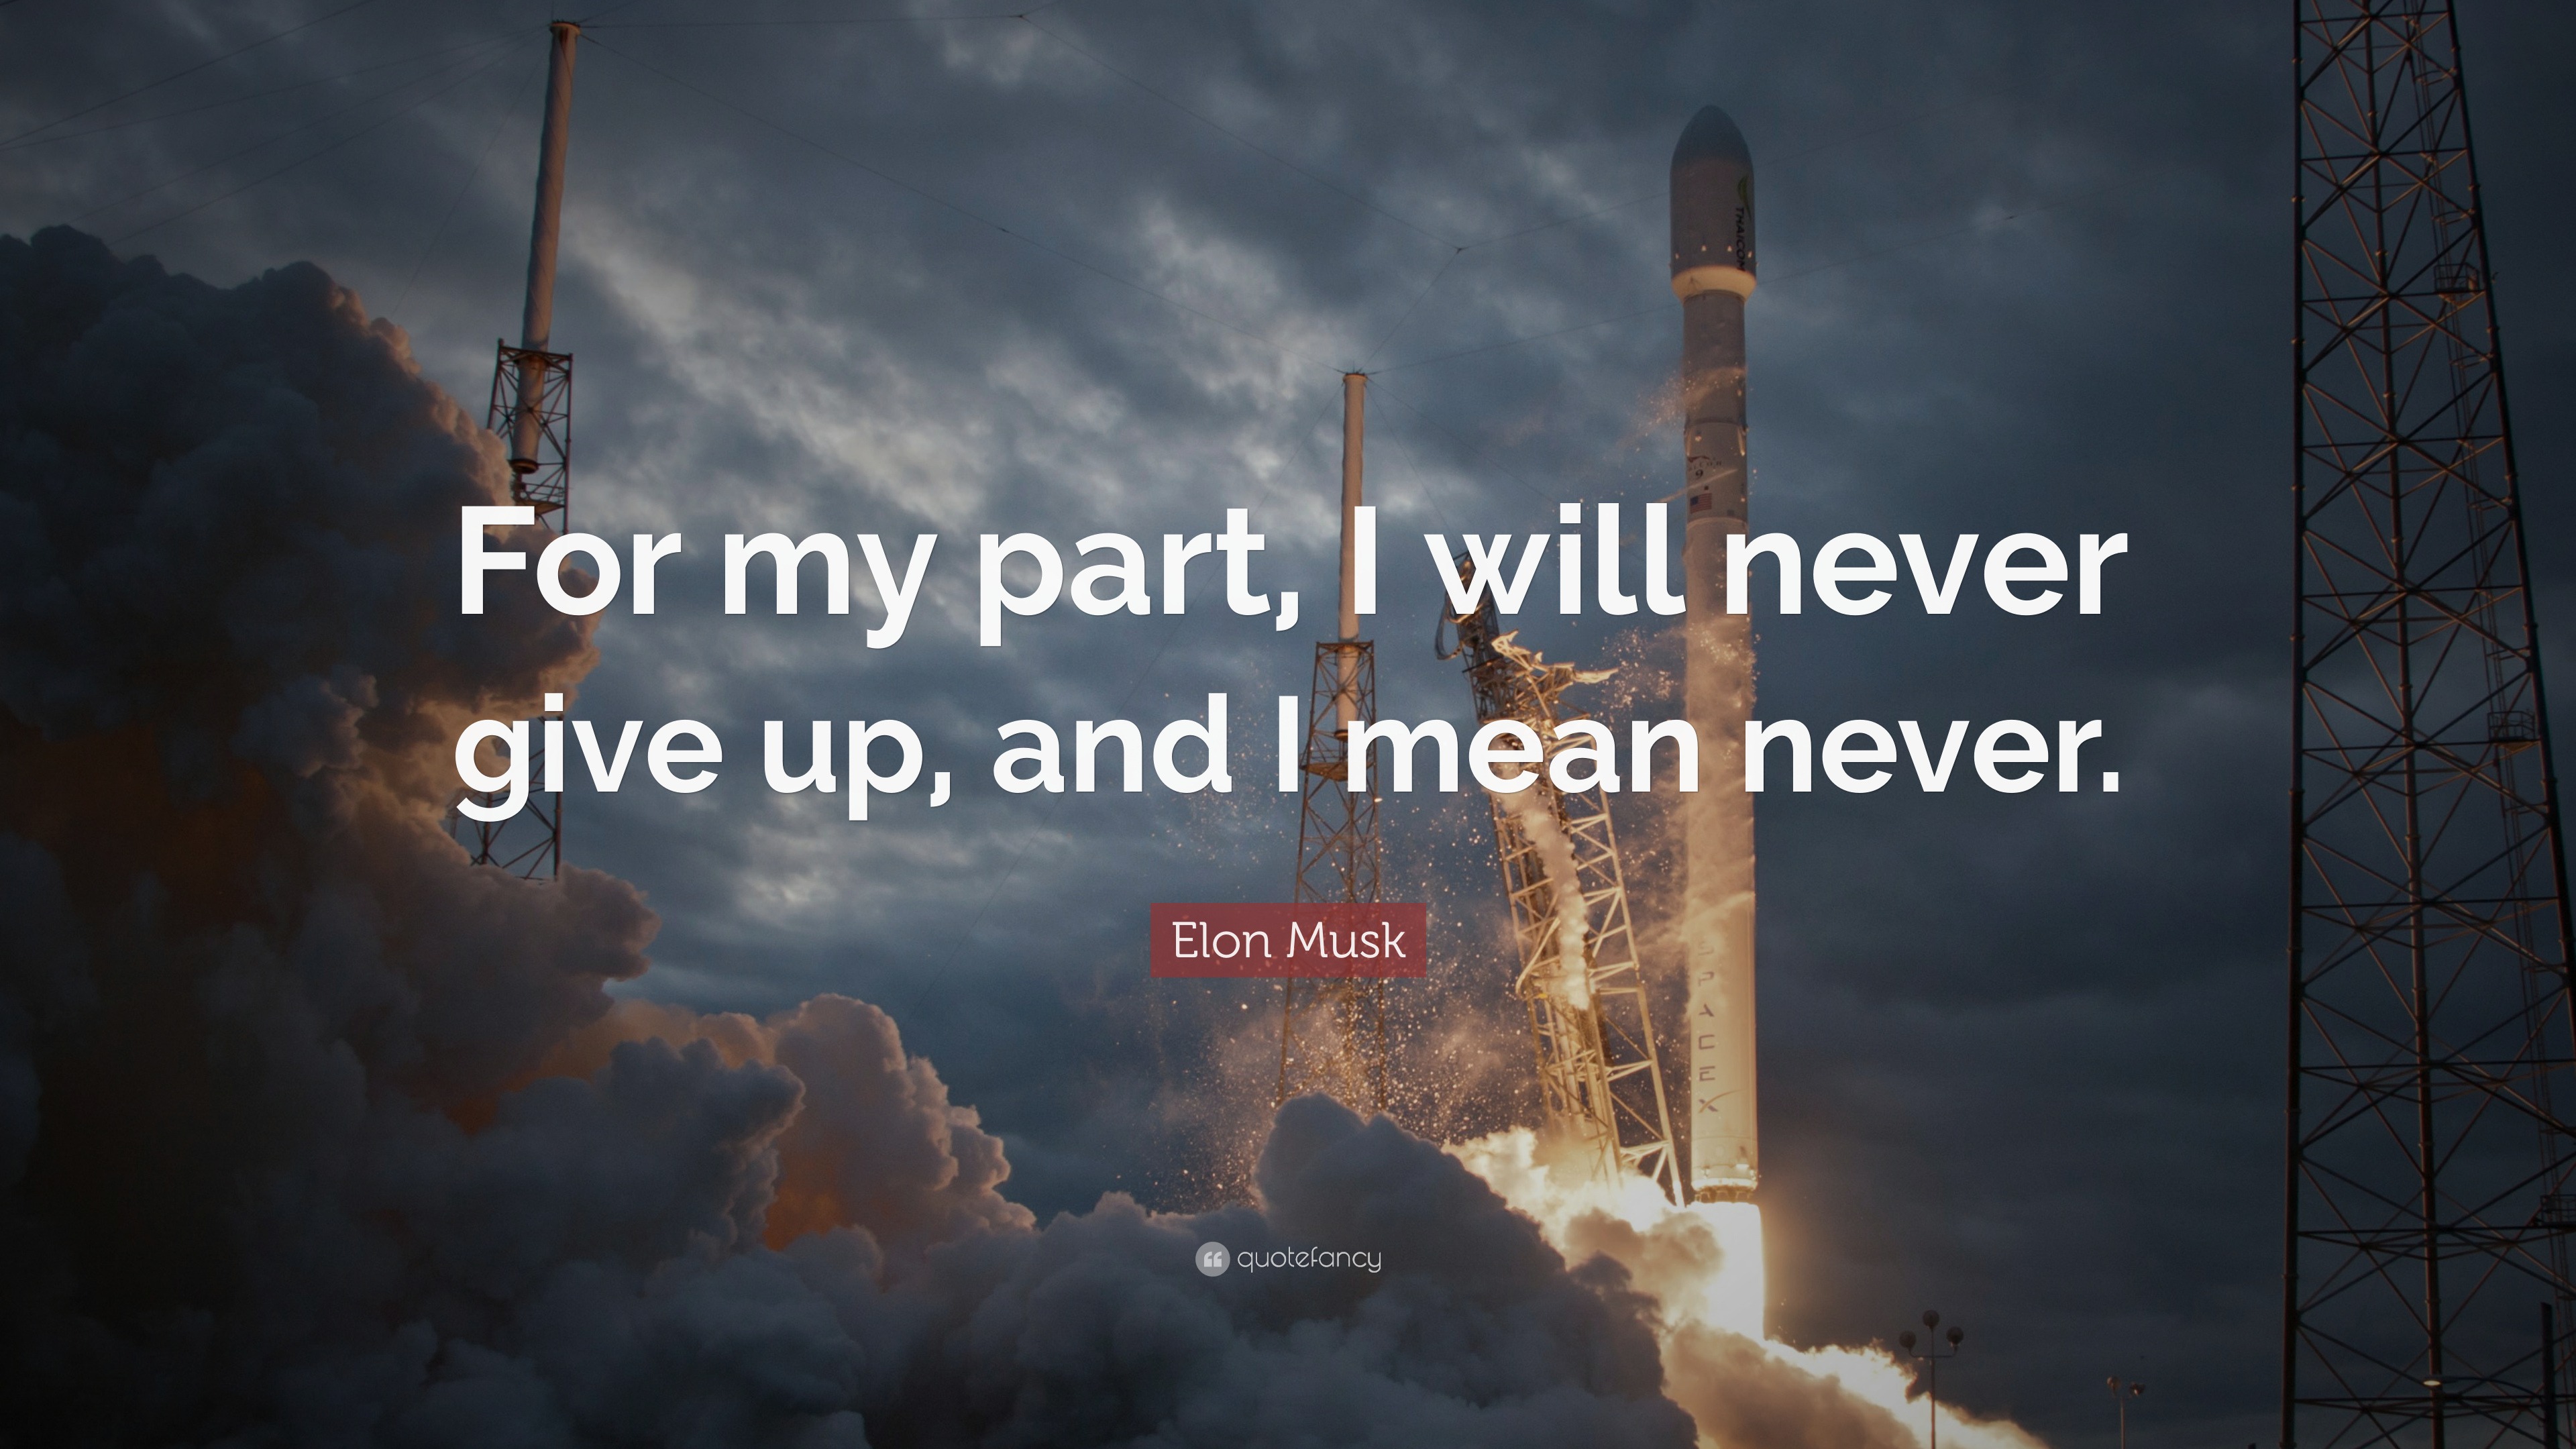 Elon Musk Quote: “For my part, I will never give up, and I mean never.”